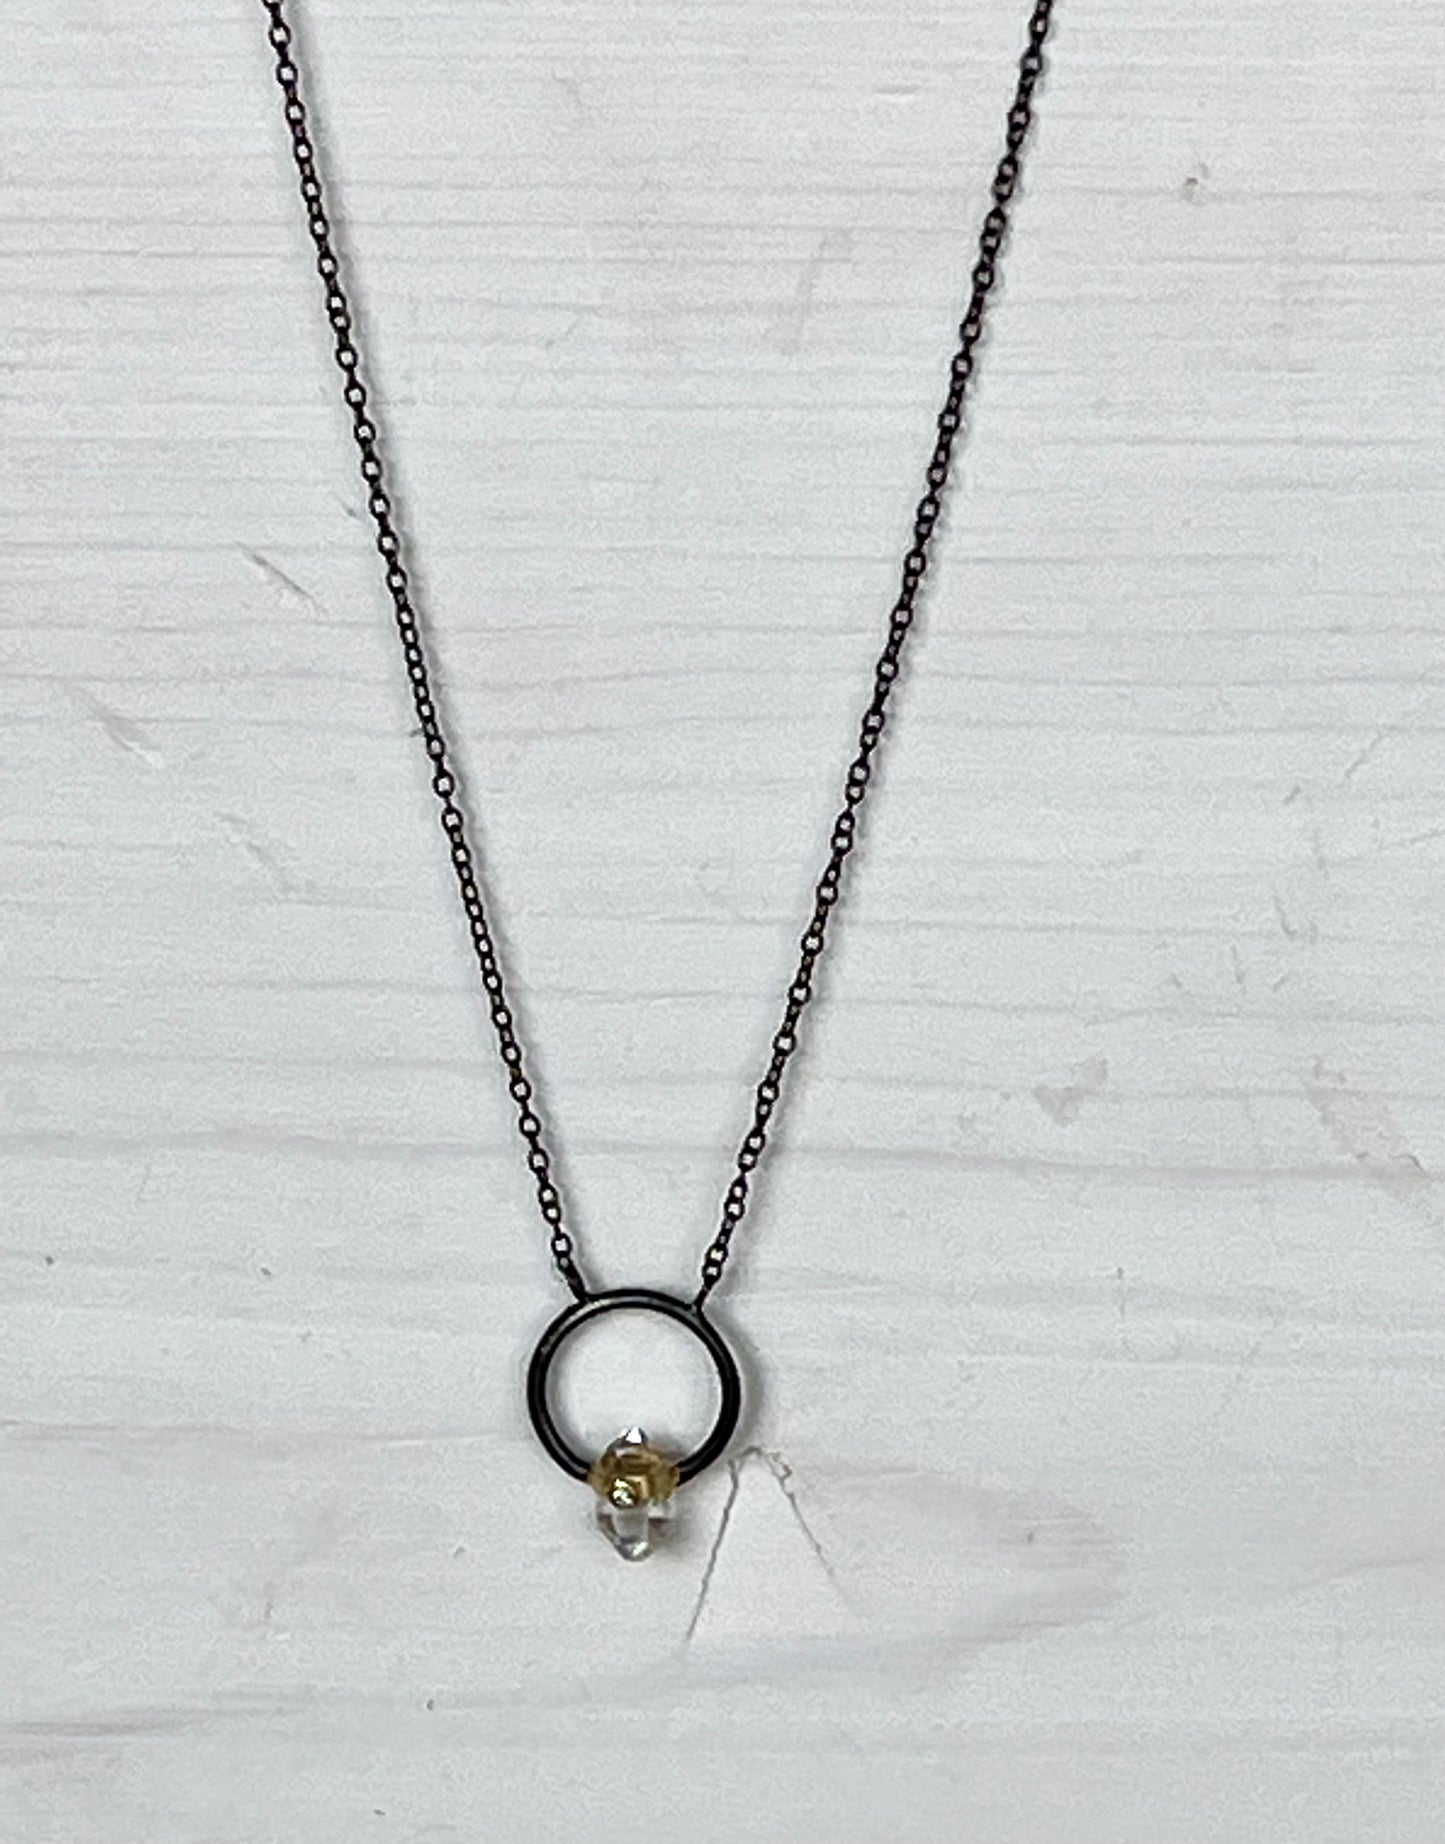 Halo Necklace with Herkimer and Natural Diamond - 3 colors